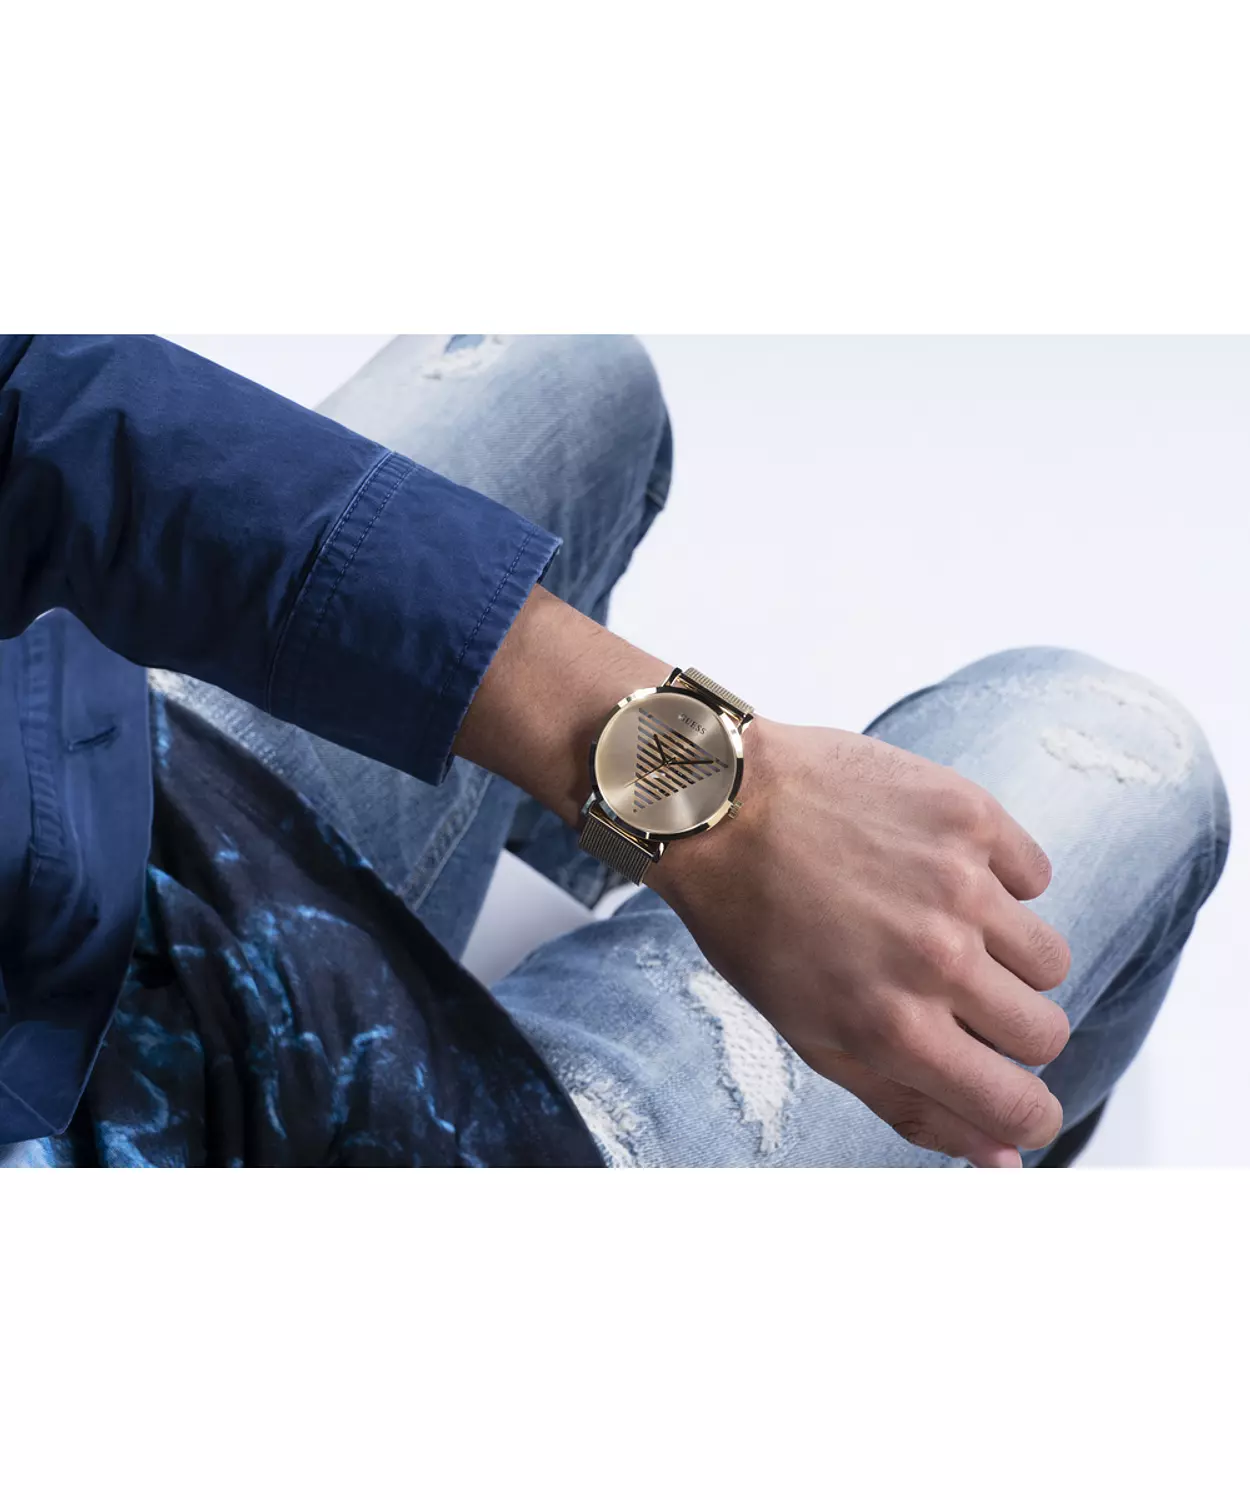 GUESS GW0502G1 ANALOG WATCH For Men Round Shape Gold Stainless Steel/Mesh Polished Bracelet 6